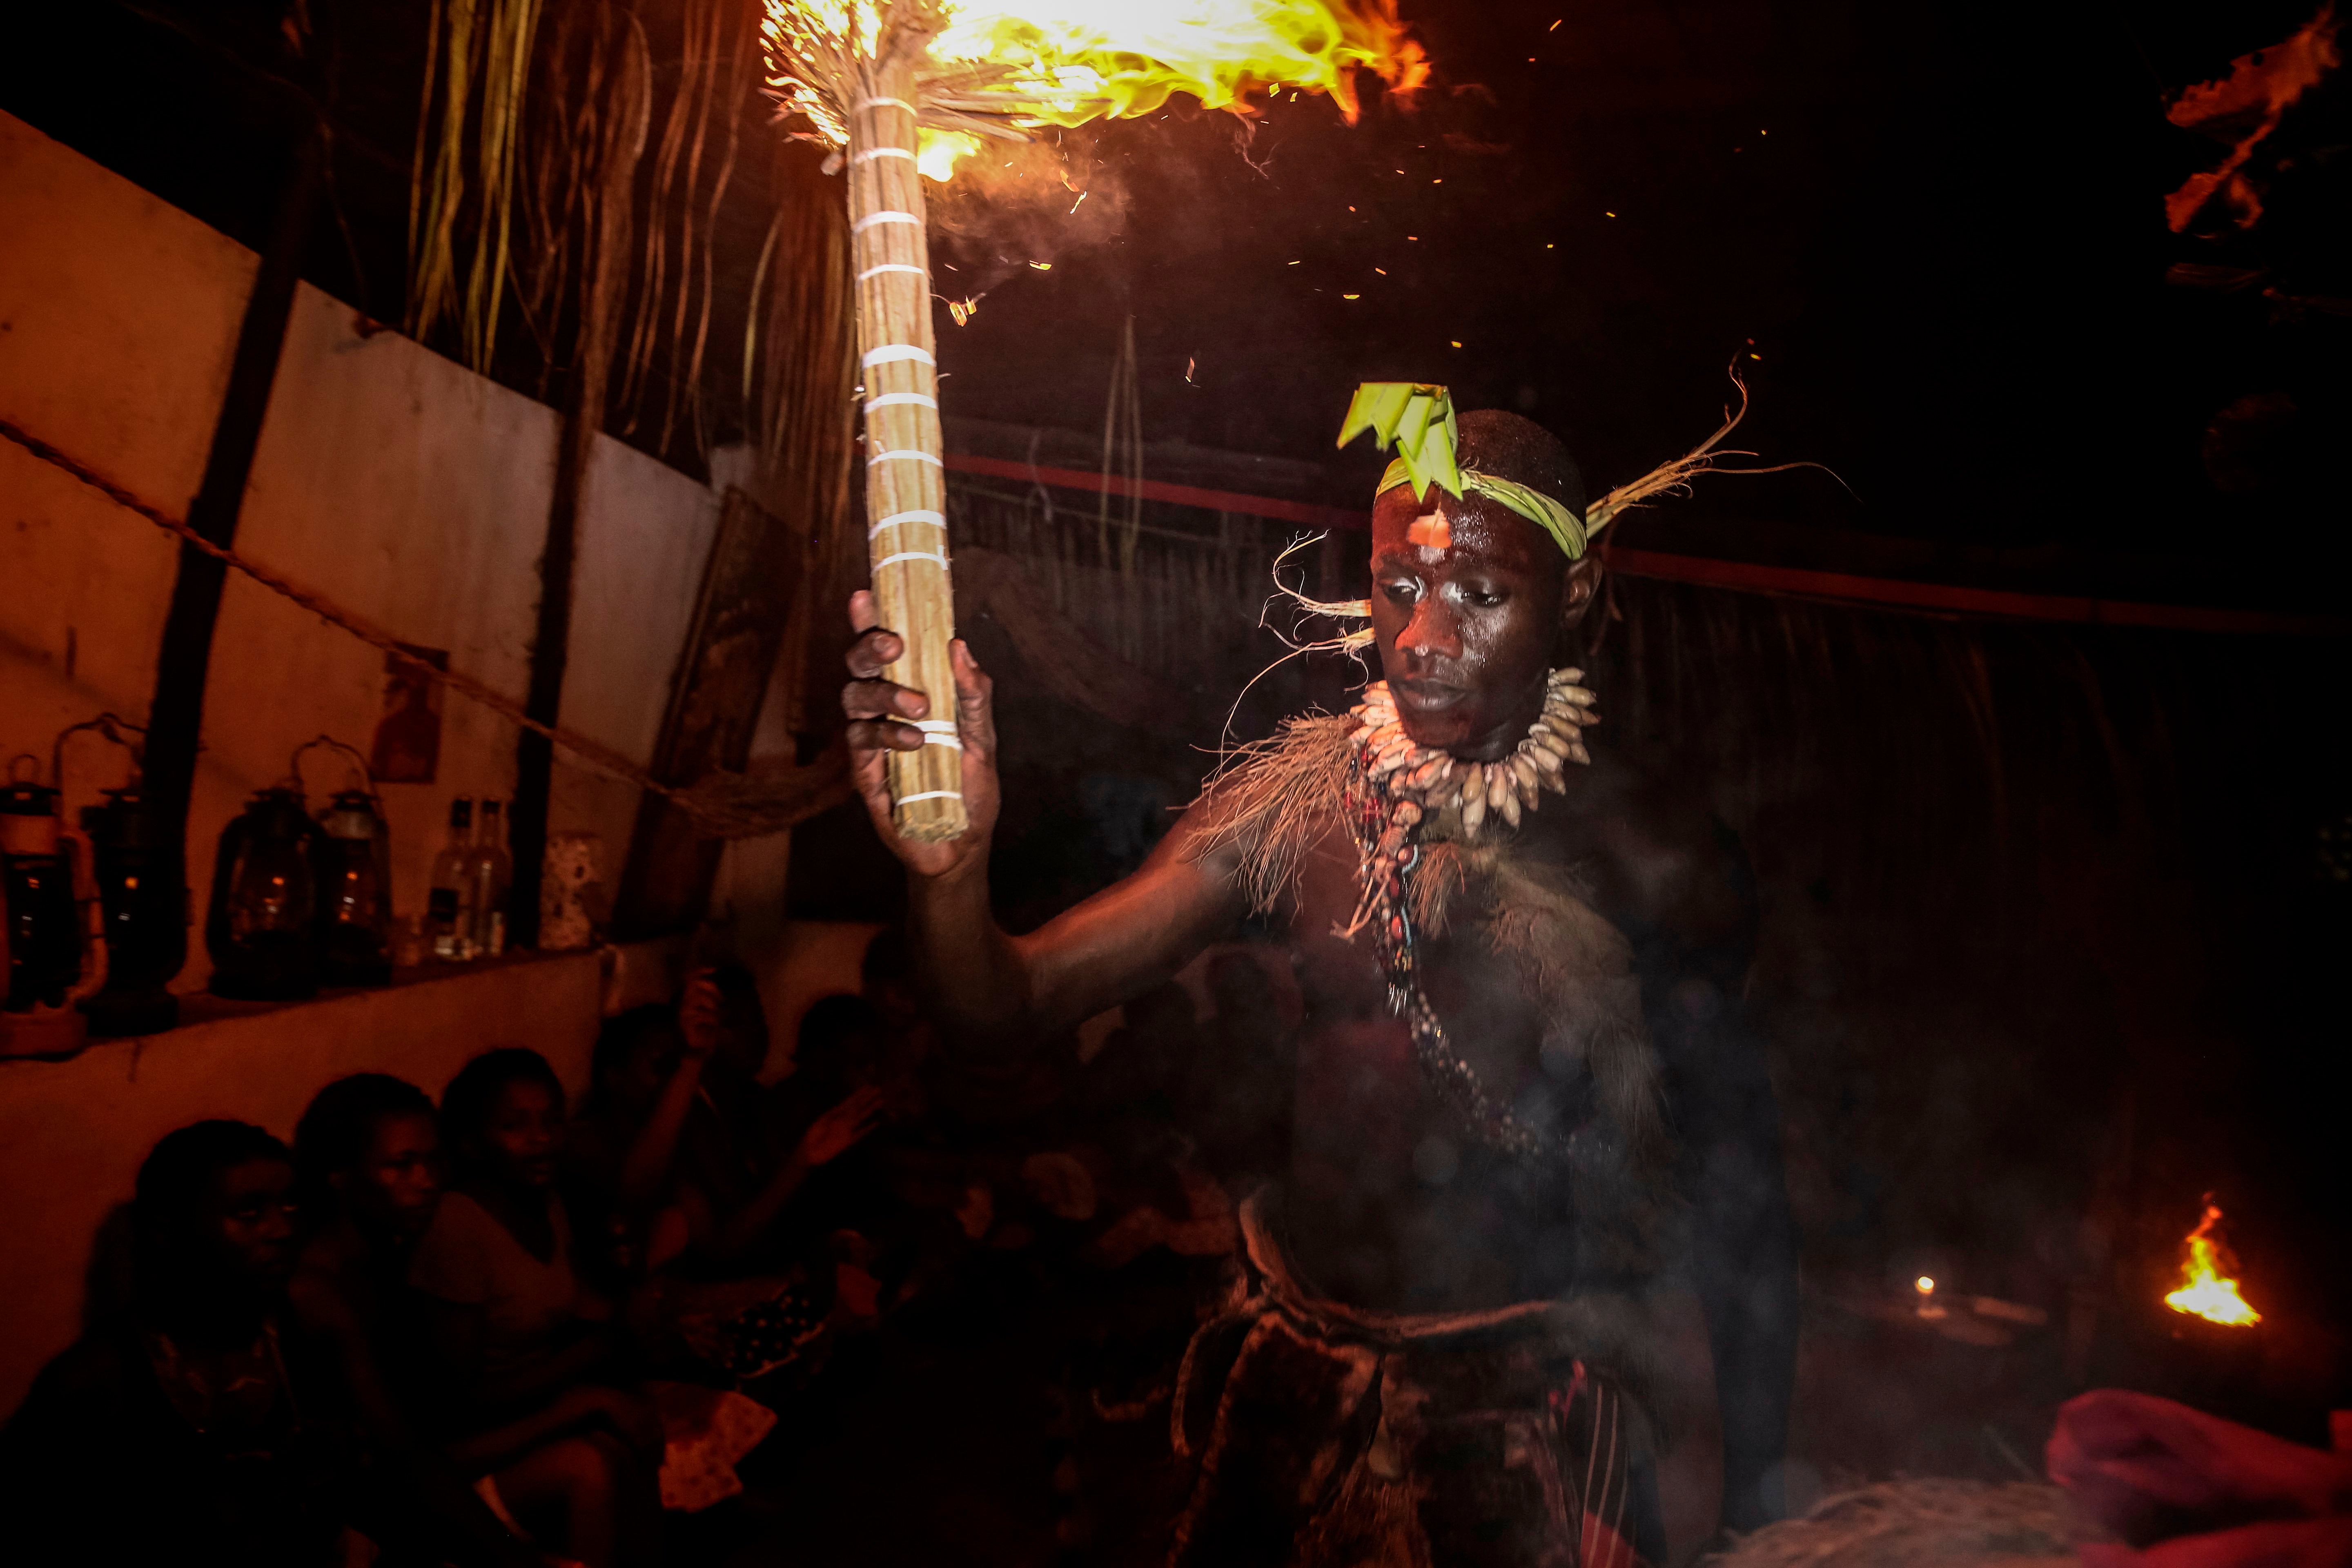 An initiate of the Bwiti rite dances during a ceremony after having used the iboga plant in Libreville. Iboga, extract from a plant known for its hallucinogenic powers, used in the Gabonese traditional rite, is also used to cure addictions to drugs, alcool or tobacco